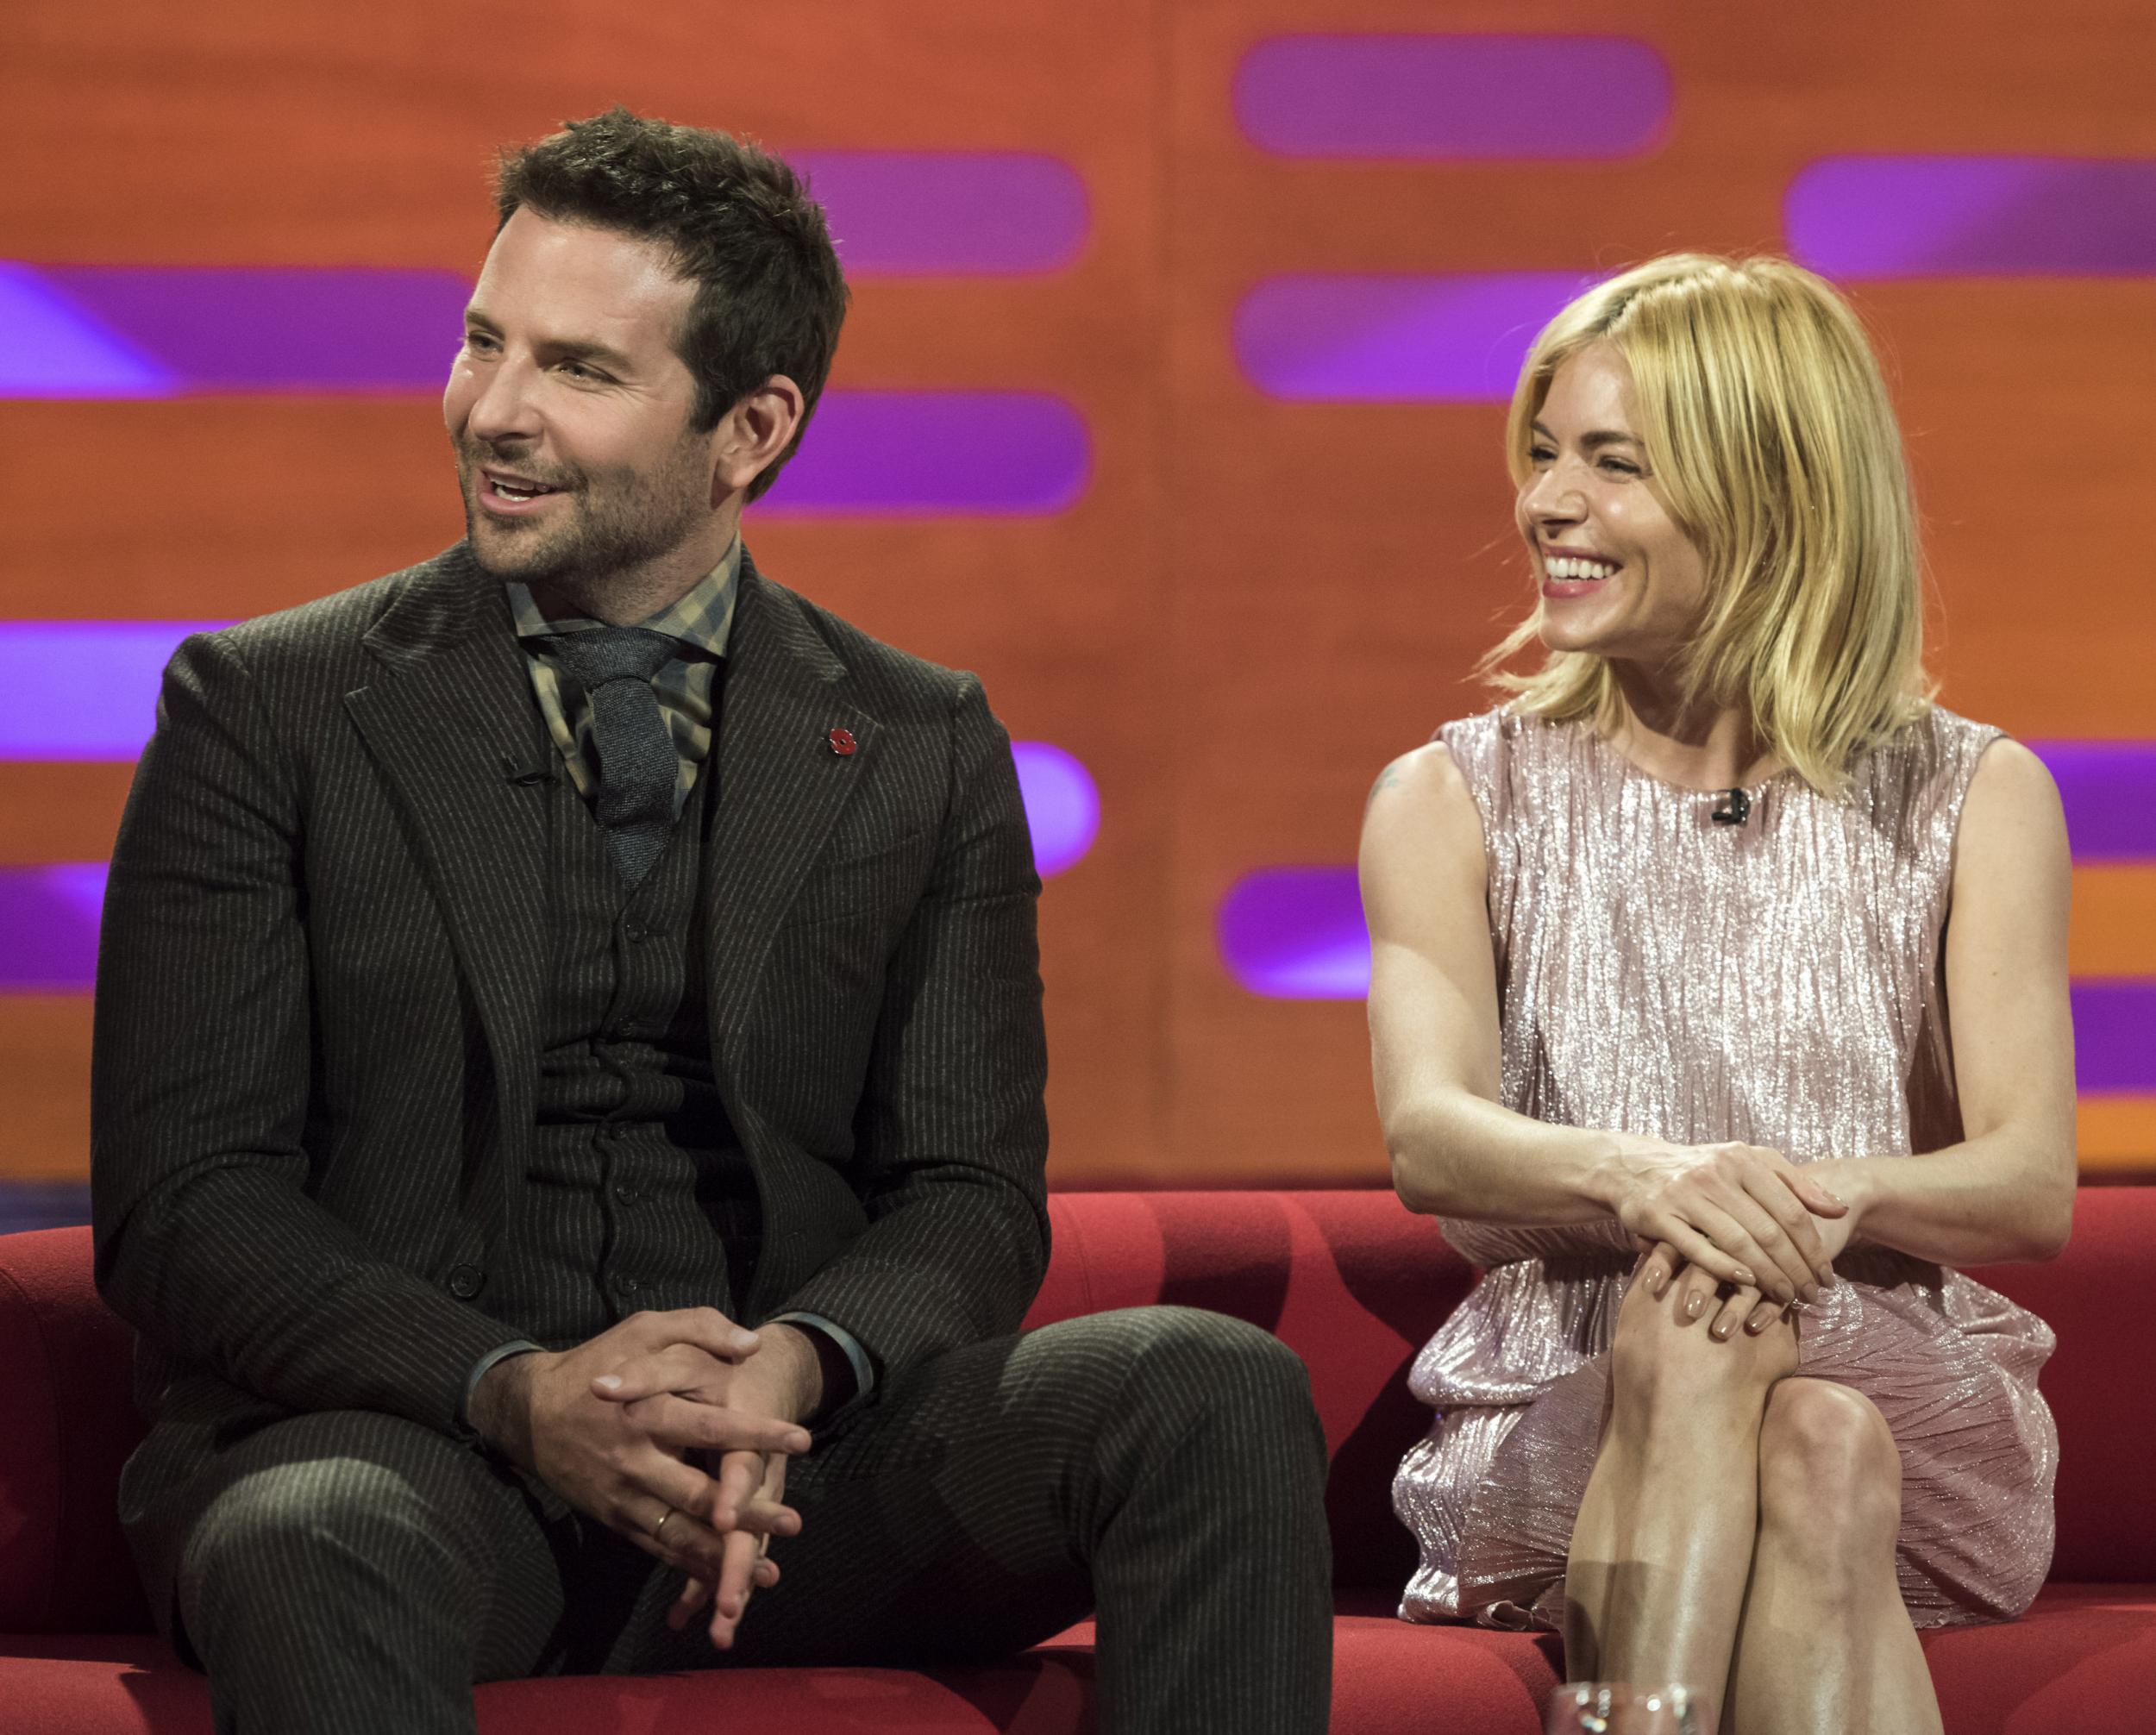 Ms Miller was on the show with Bradley Cooper to promote her new film, Burnt